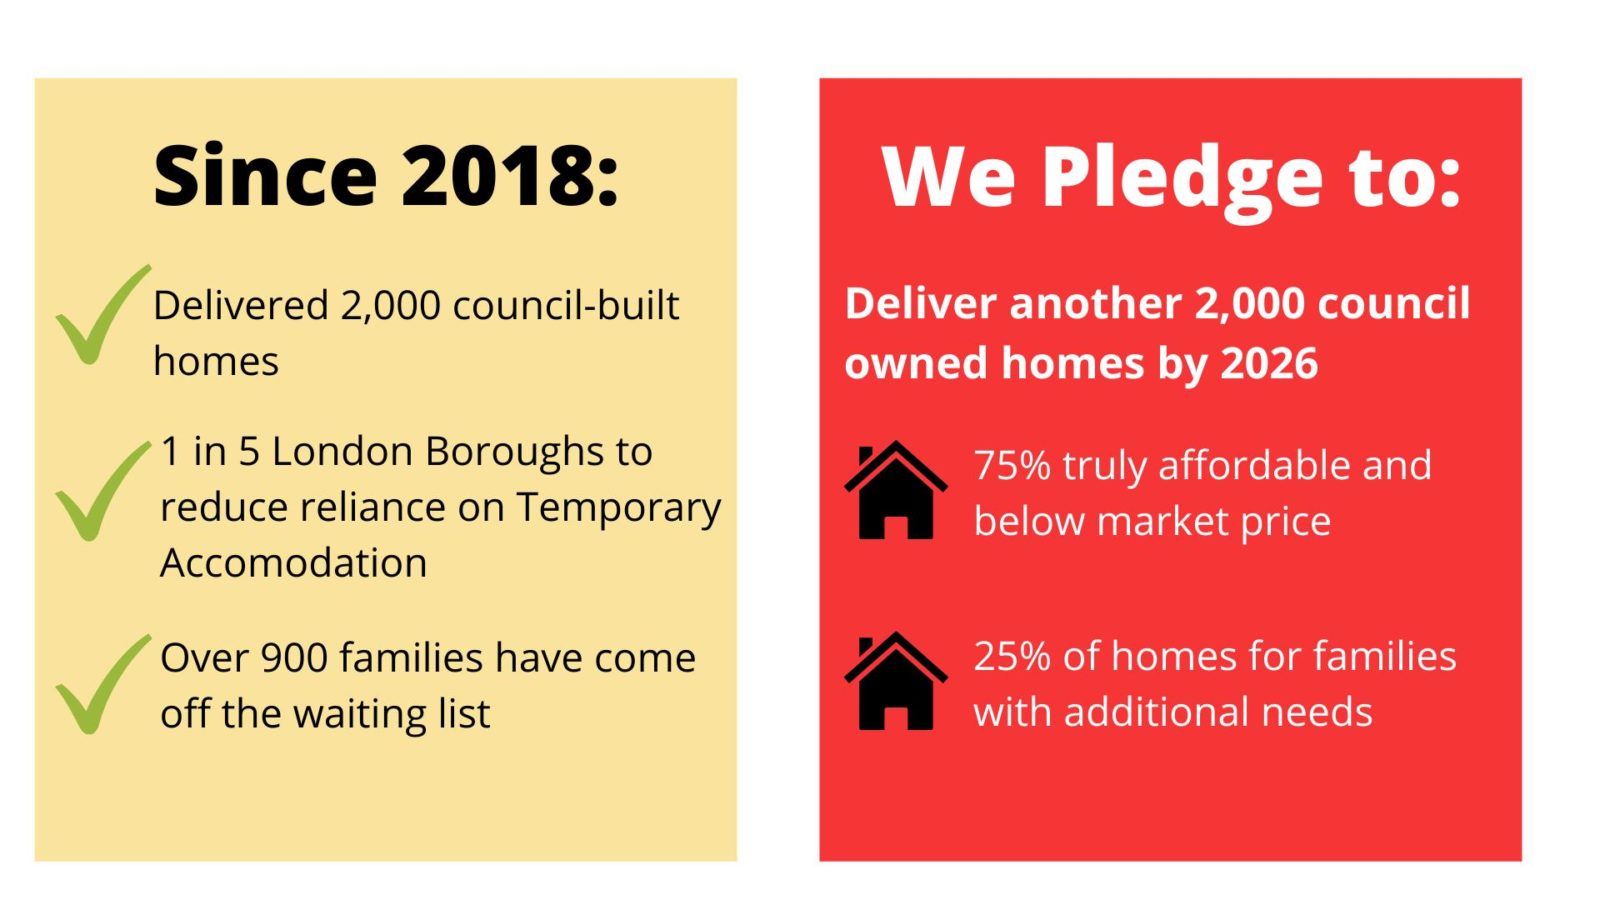 build another 2,000 affordable homes